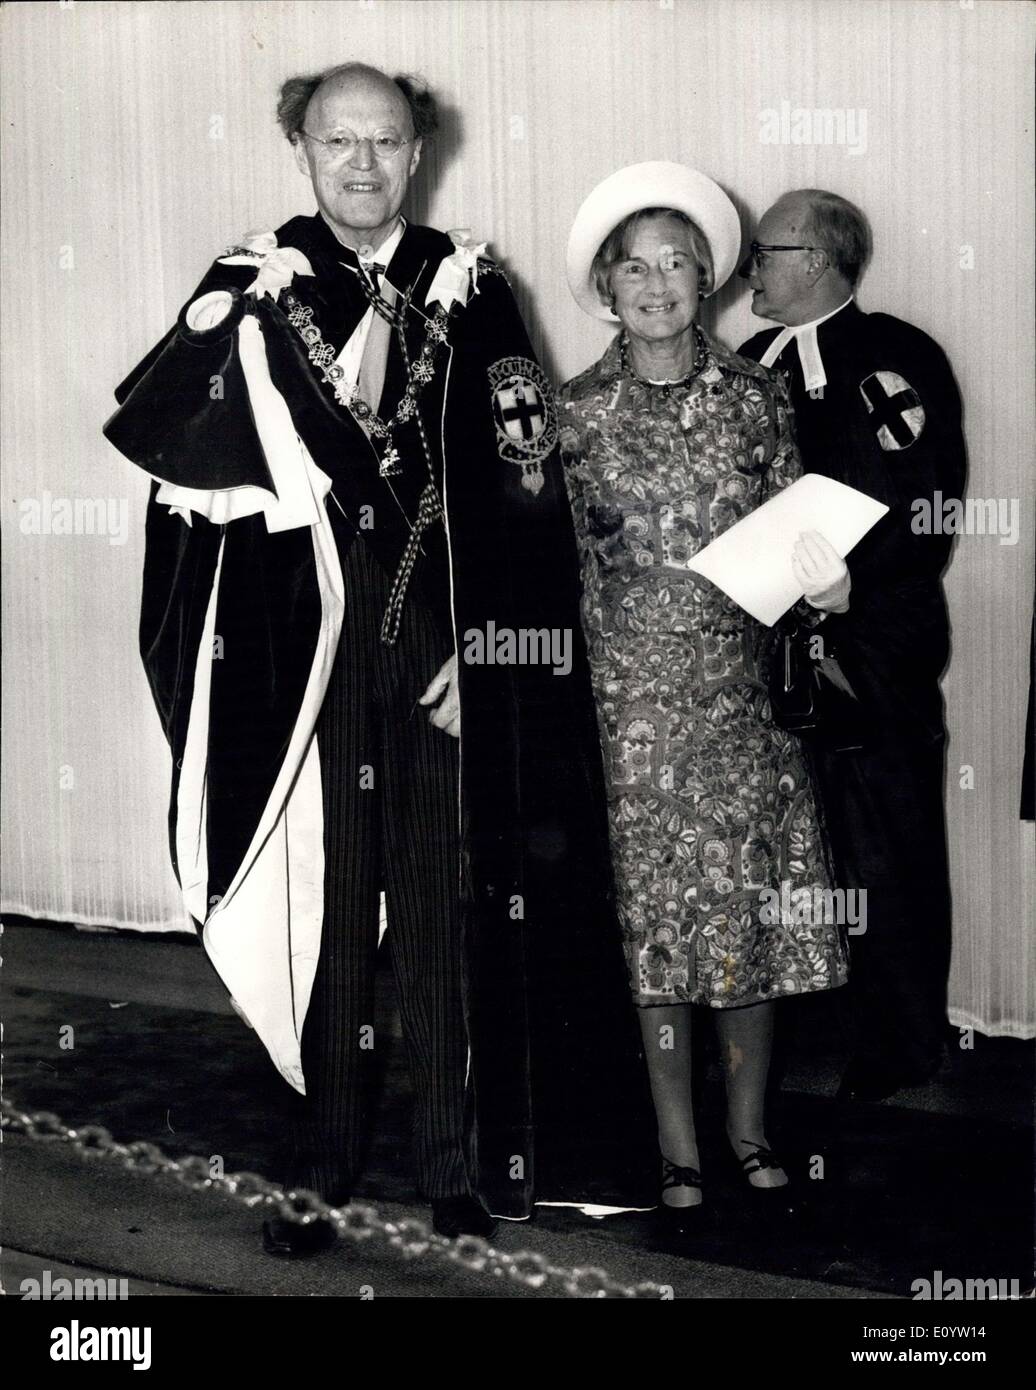 Jun. 14, 1971 - Rain Washes Out Order of the Garter Procession. The ceremonial procession of the Most Noble Order of the Garter Stock Photo